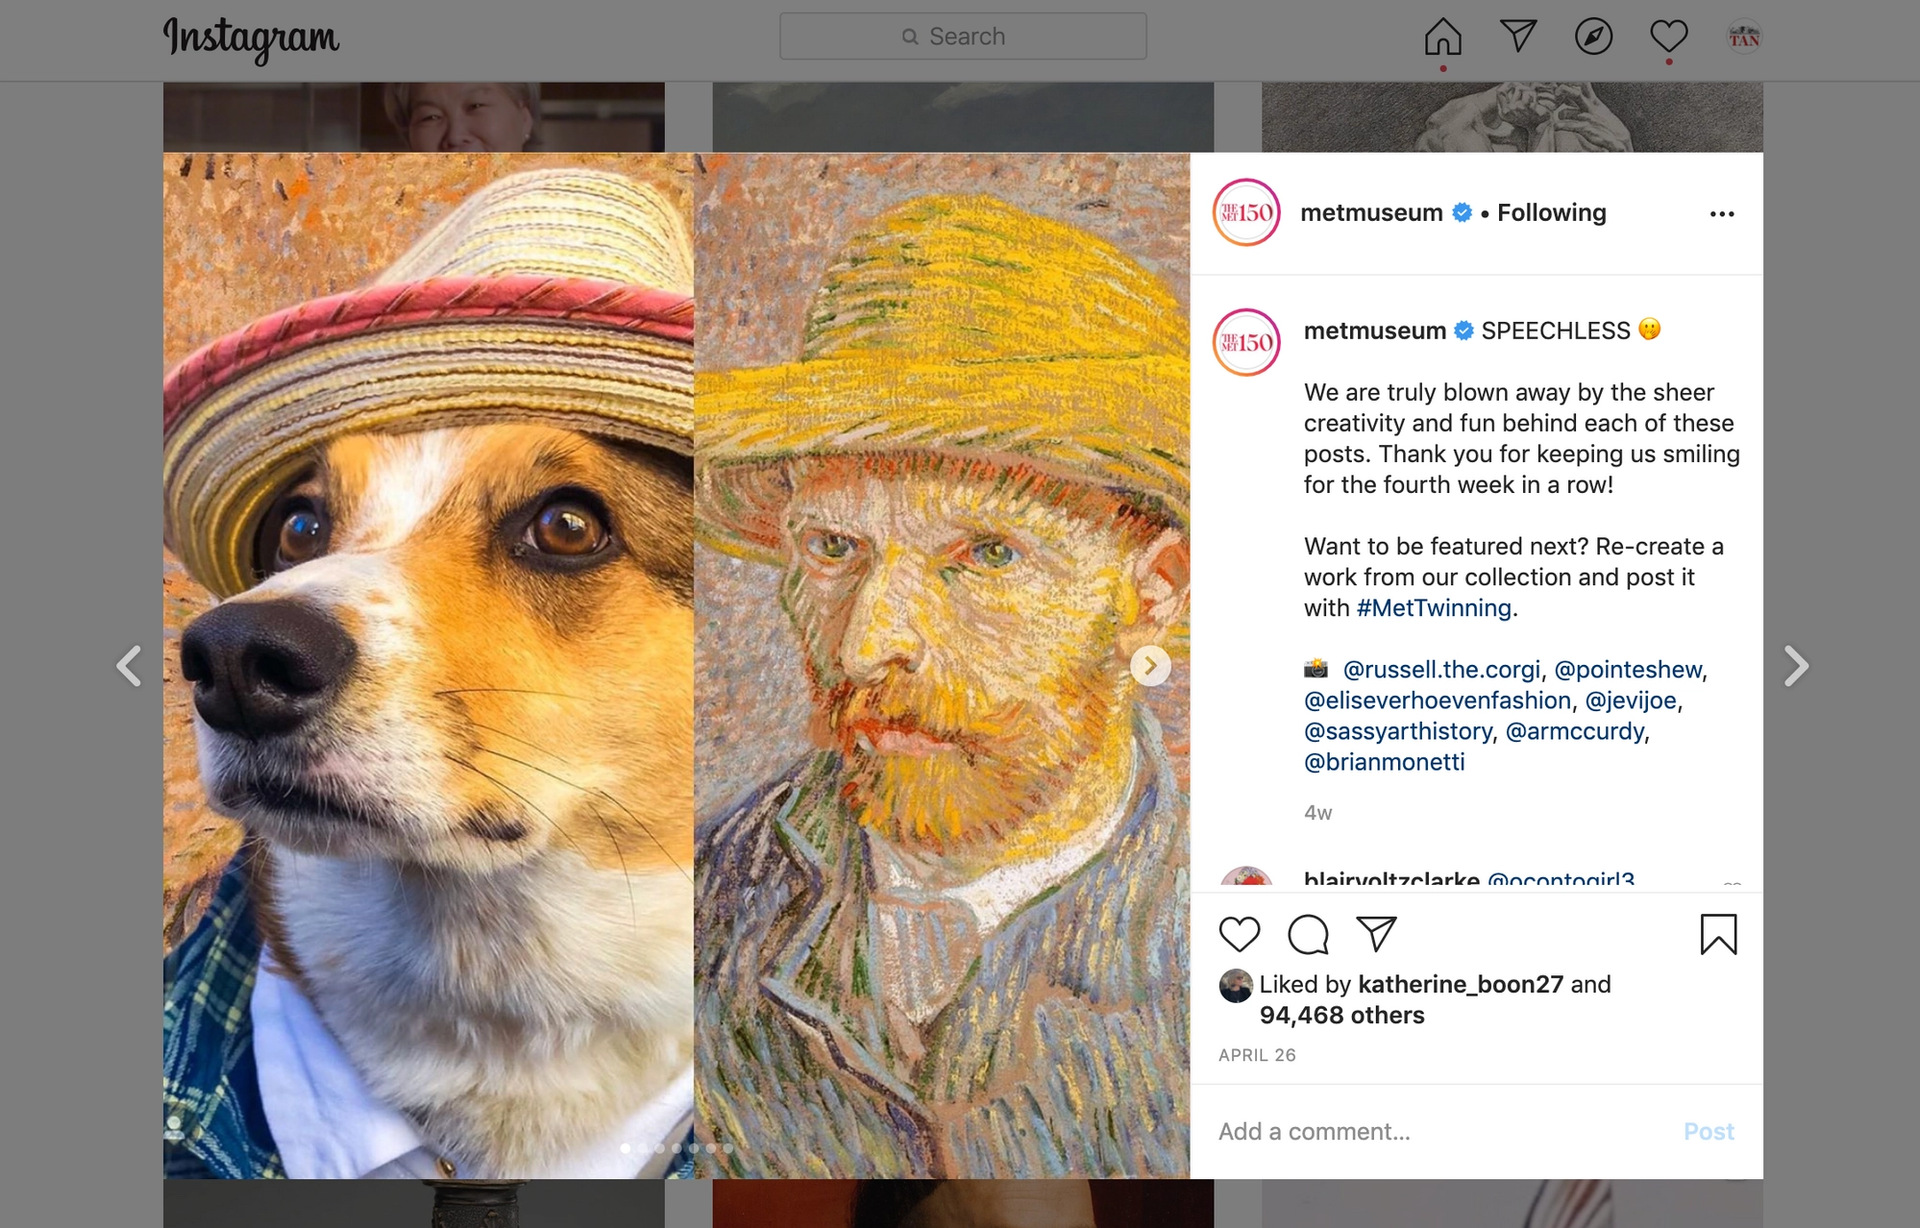 The Metropolitan Museum of Art's #MetTwinning campaign encouraged followers to recreate their favourite works from the museum's collection and share them on social media 